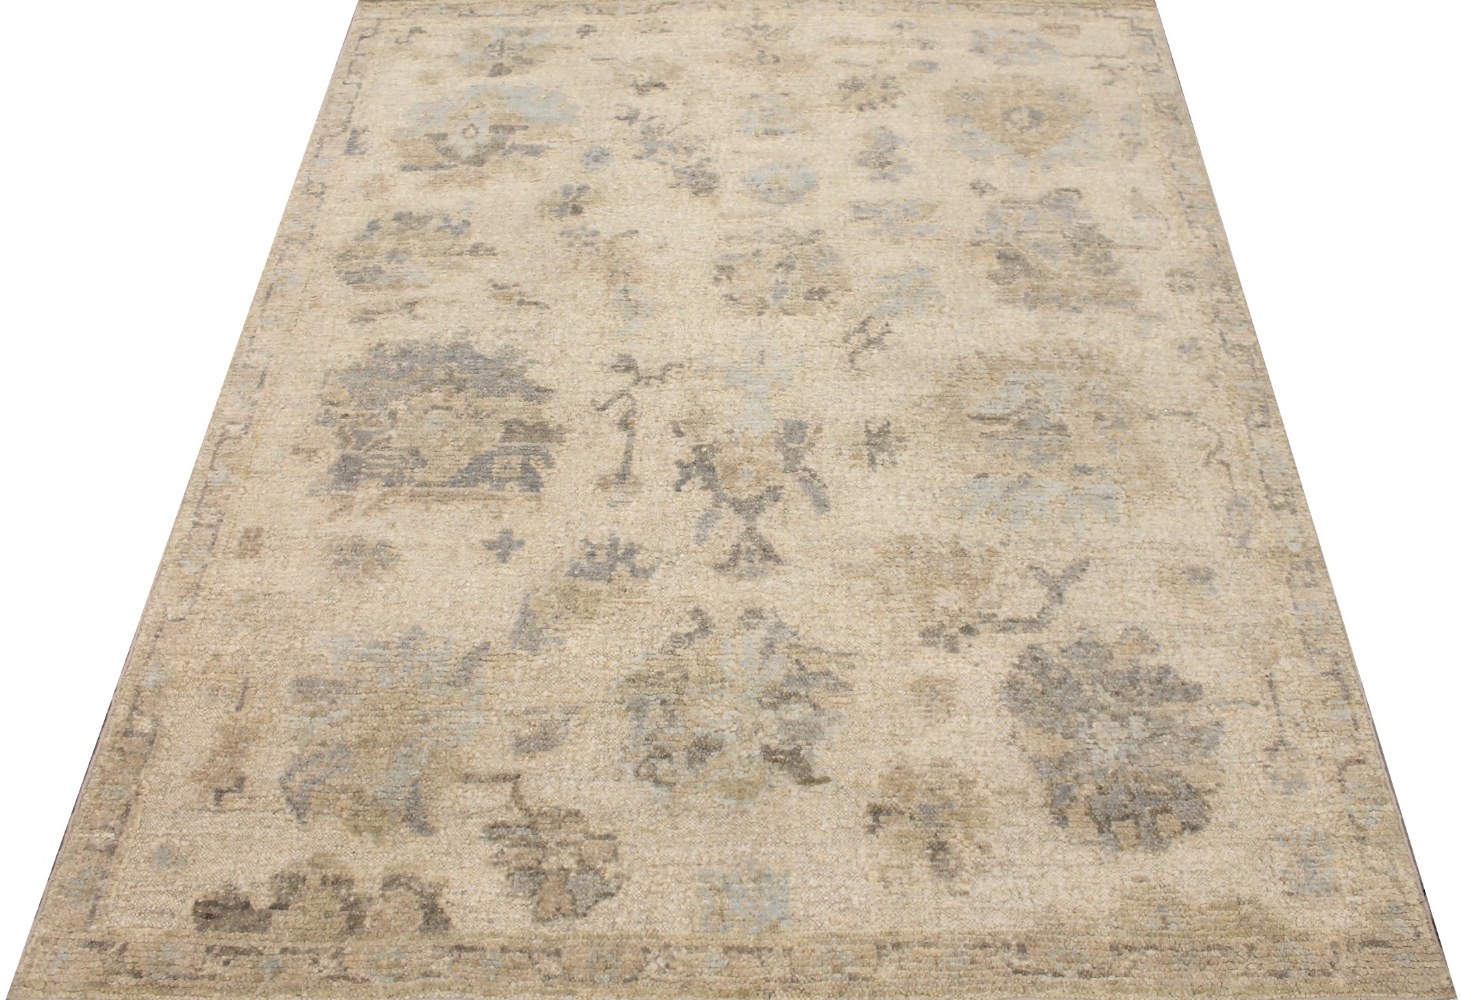 8x10 Oushak Hand Knotted Wool Area Rug - MR028900